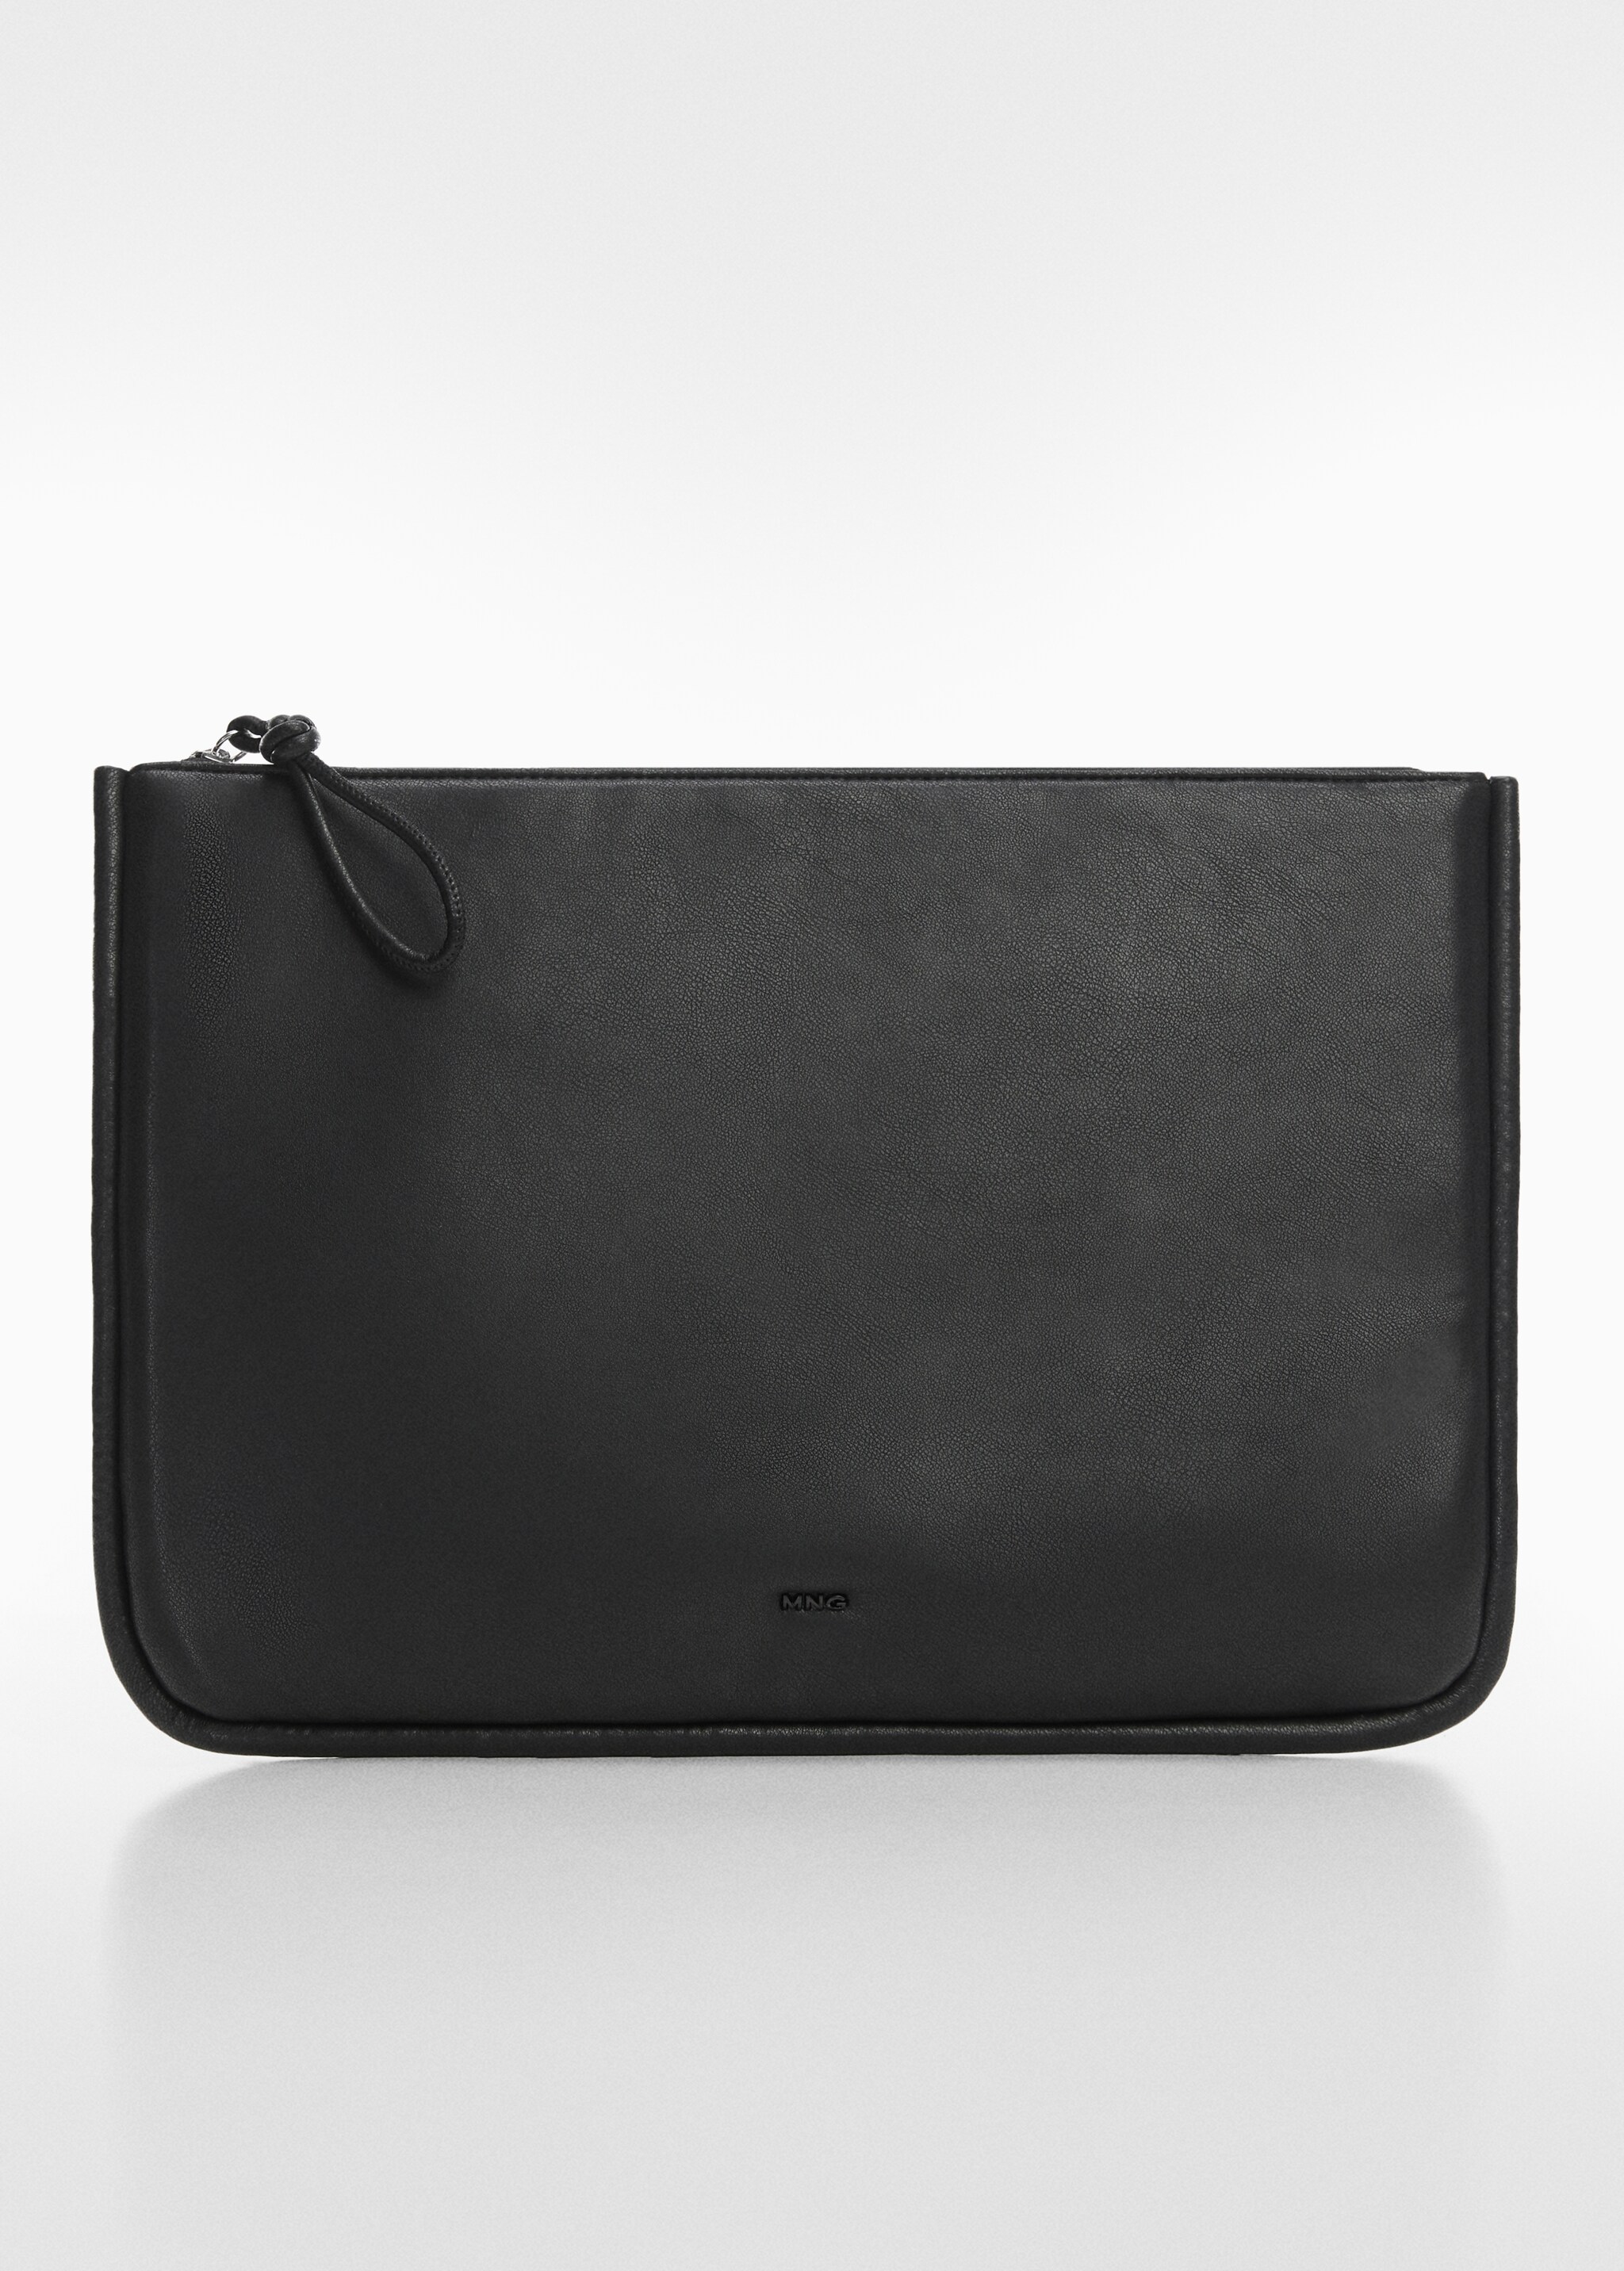 Padded laptop case - Article without model